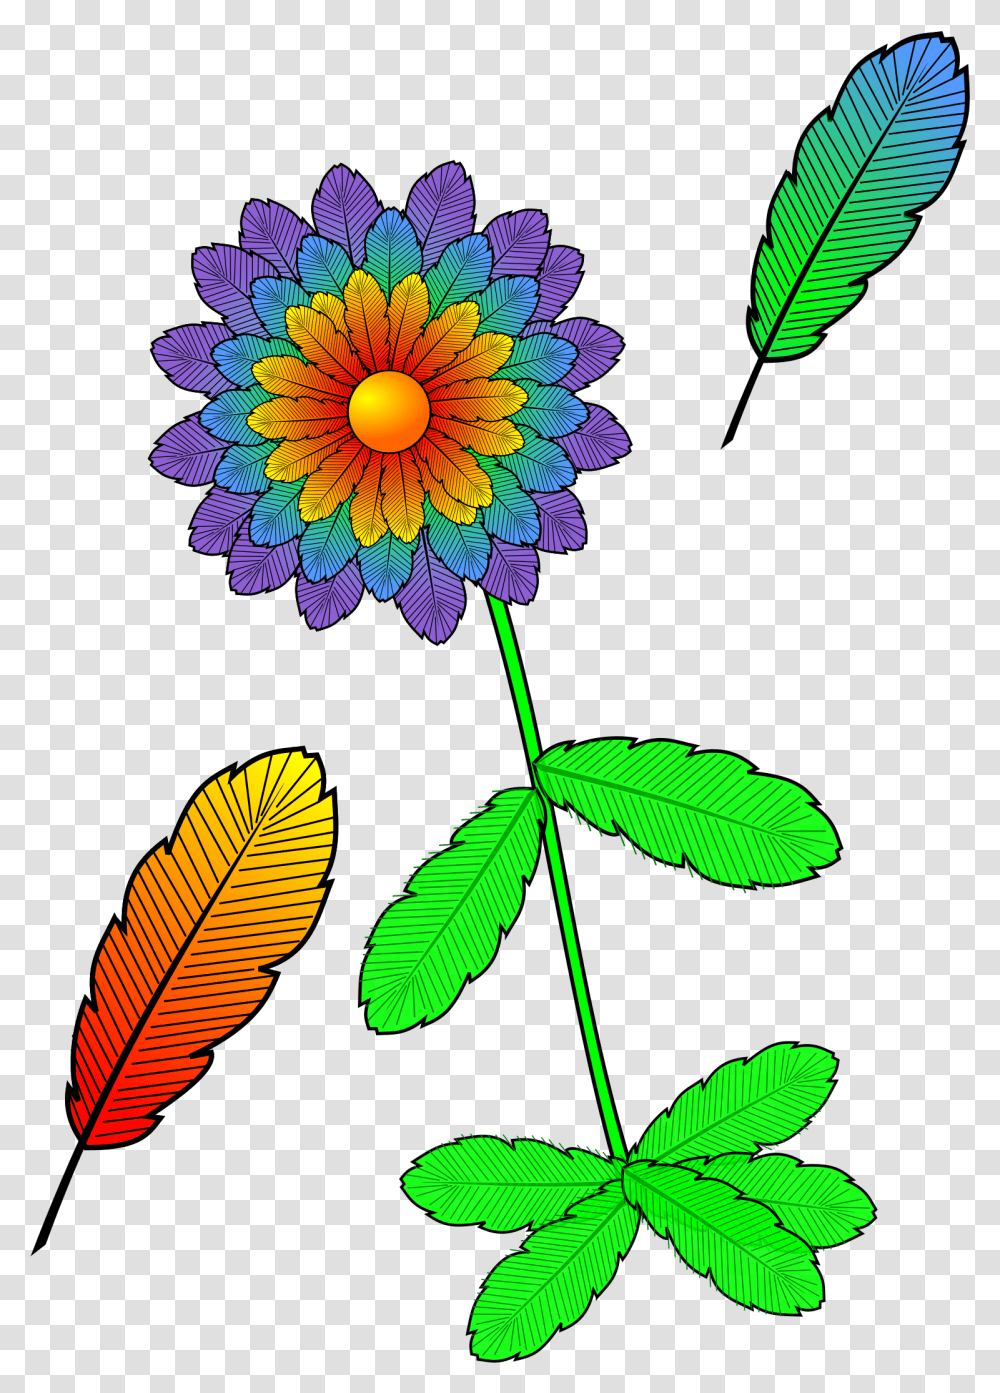 Flower And Feather Clip Art, Leaf, Plant, Pattern, Ornament Transparent Png